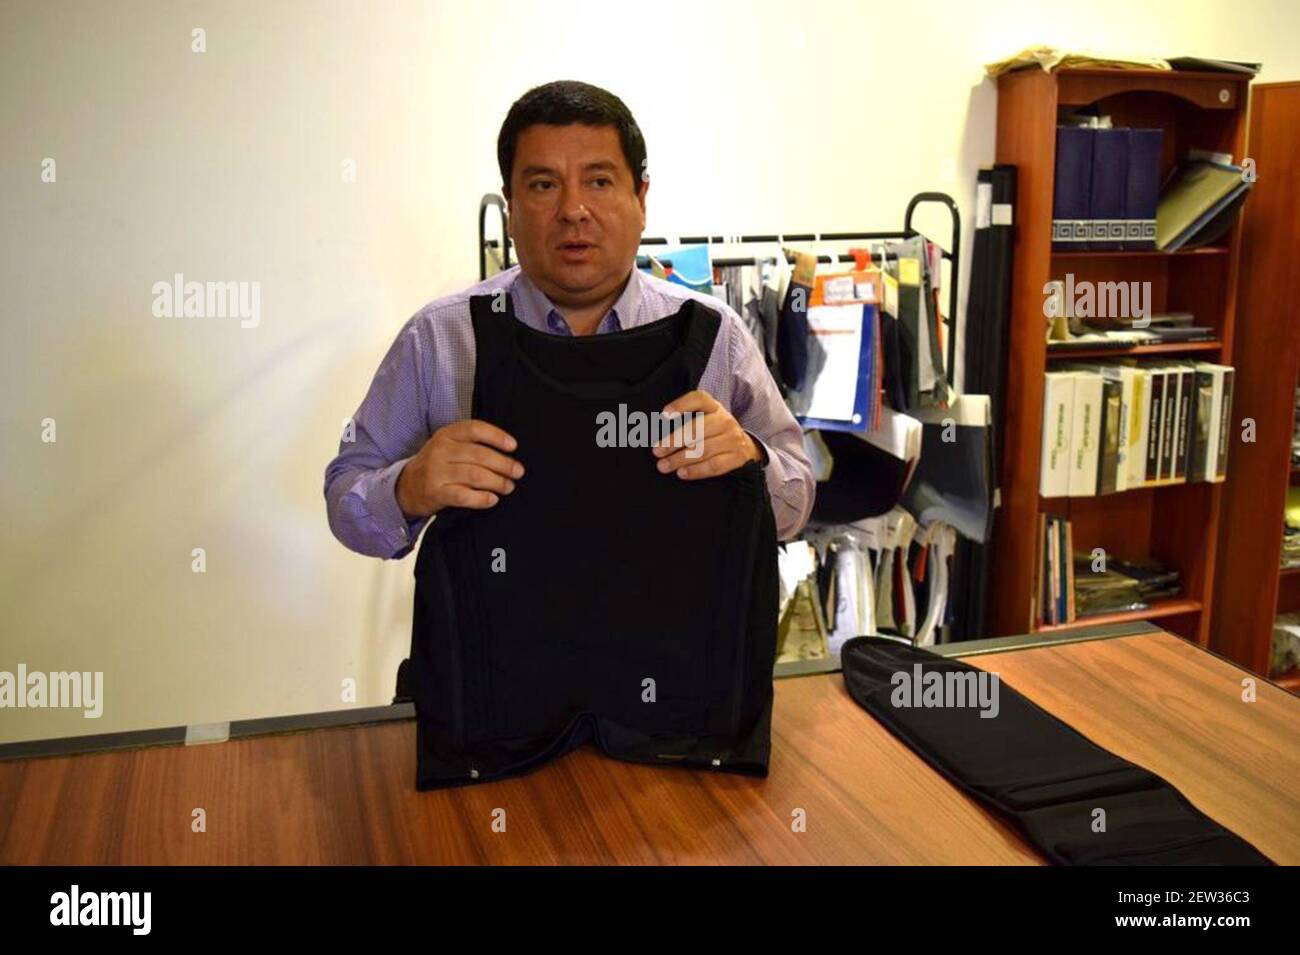 Miguel Caballero, the founder of his eponymous bullet-proof clothing line,  shows off his patented bulletproof T-shirt, which recently won an  international design award. His company is starting to sell its products in